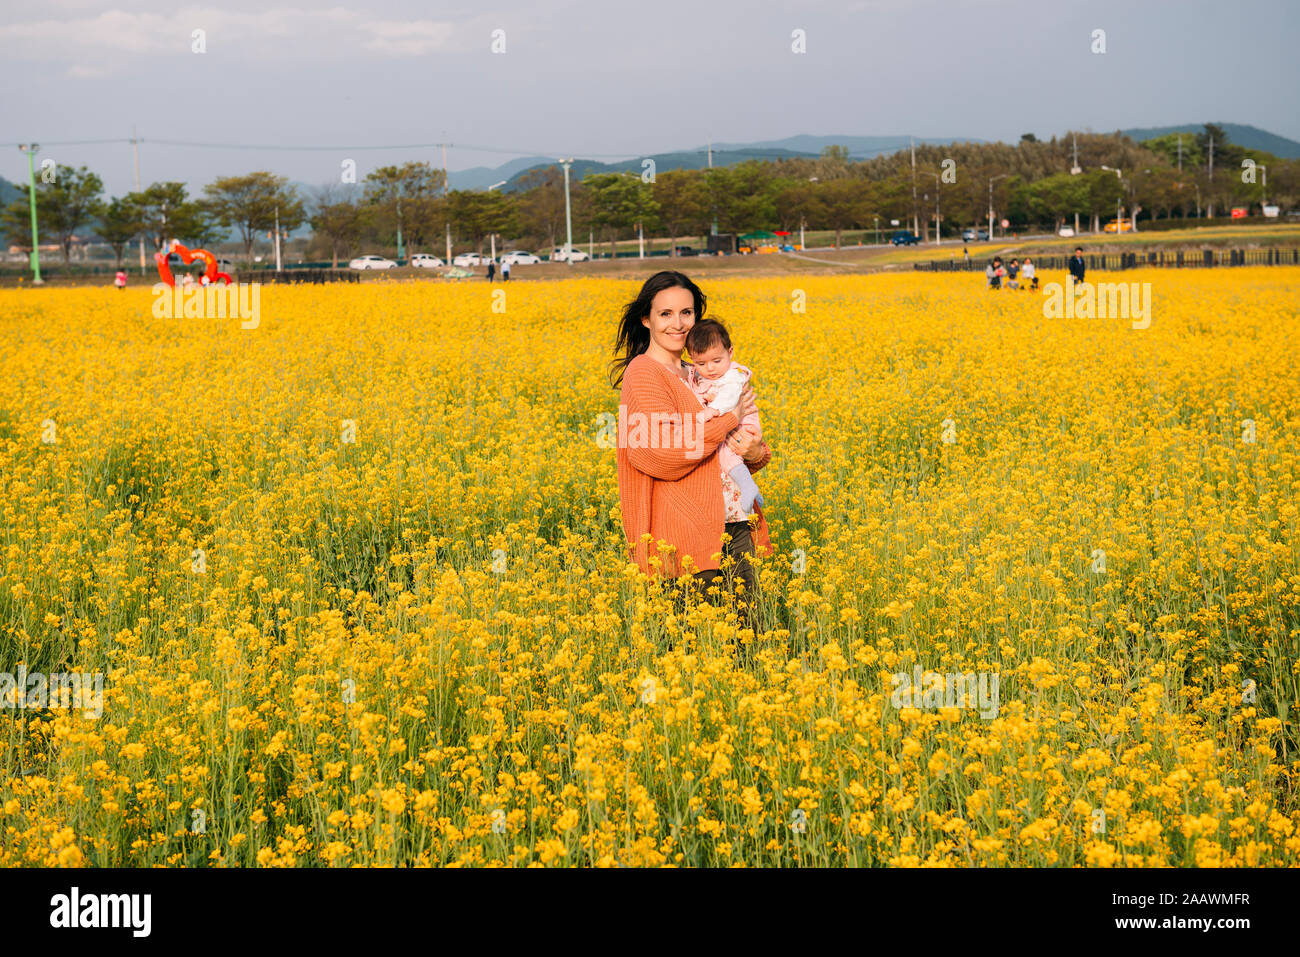 Portrait of happy woman with baby girl on her arms standing in a rape field, Gyeongju, South Korea Stock Photo